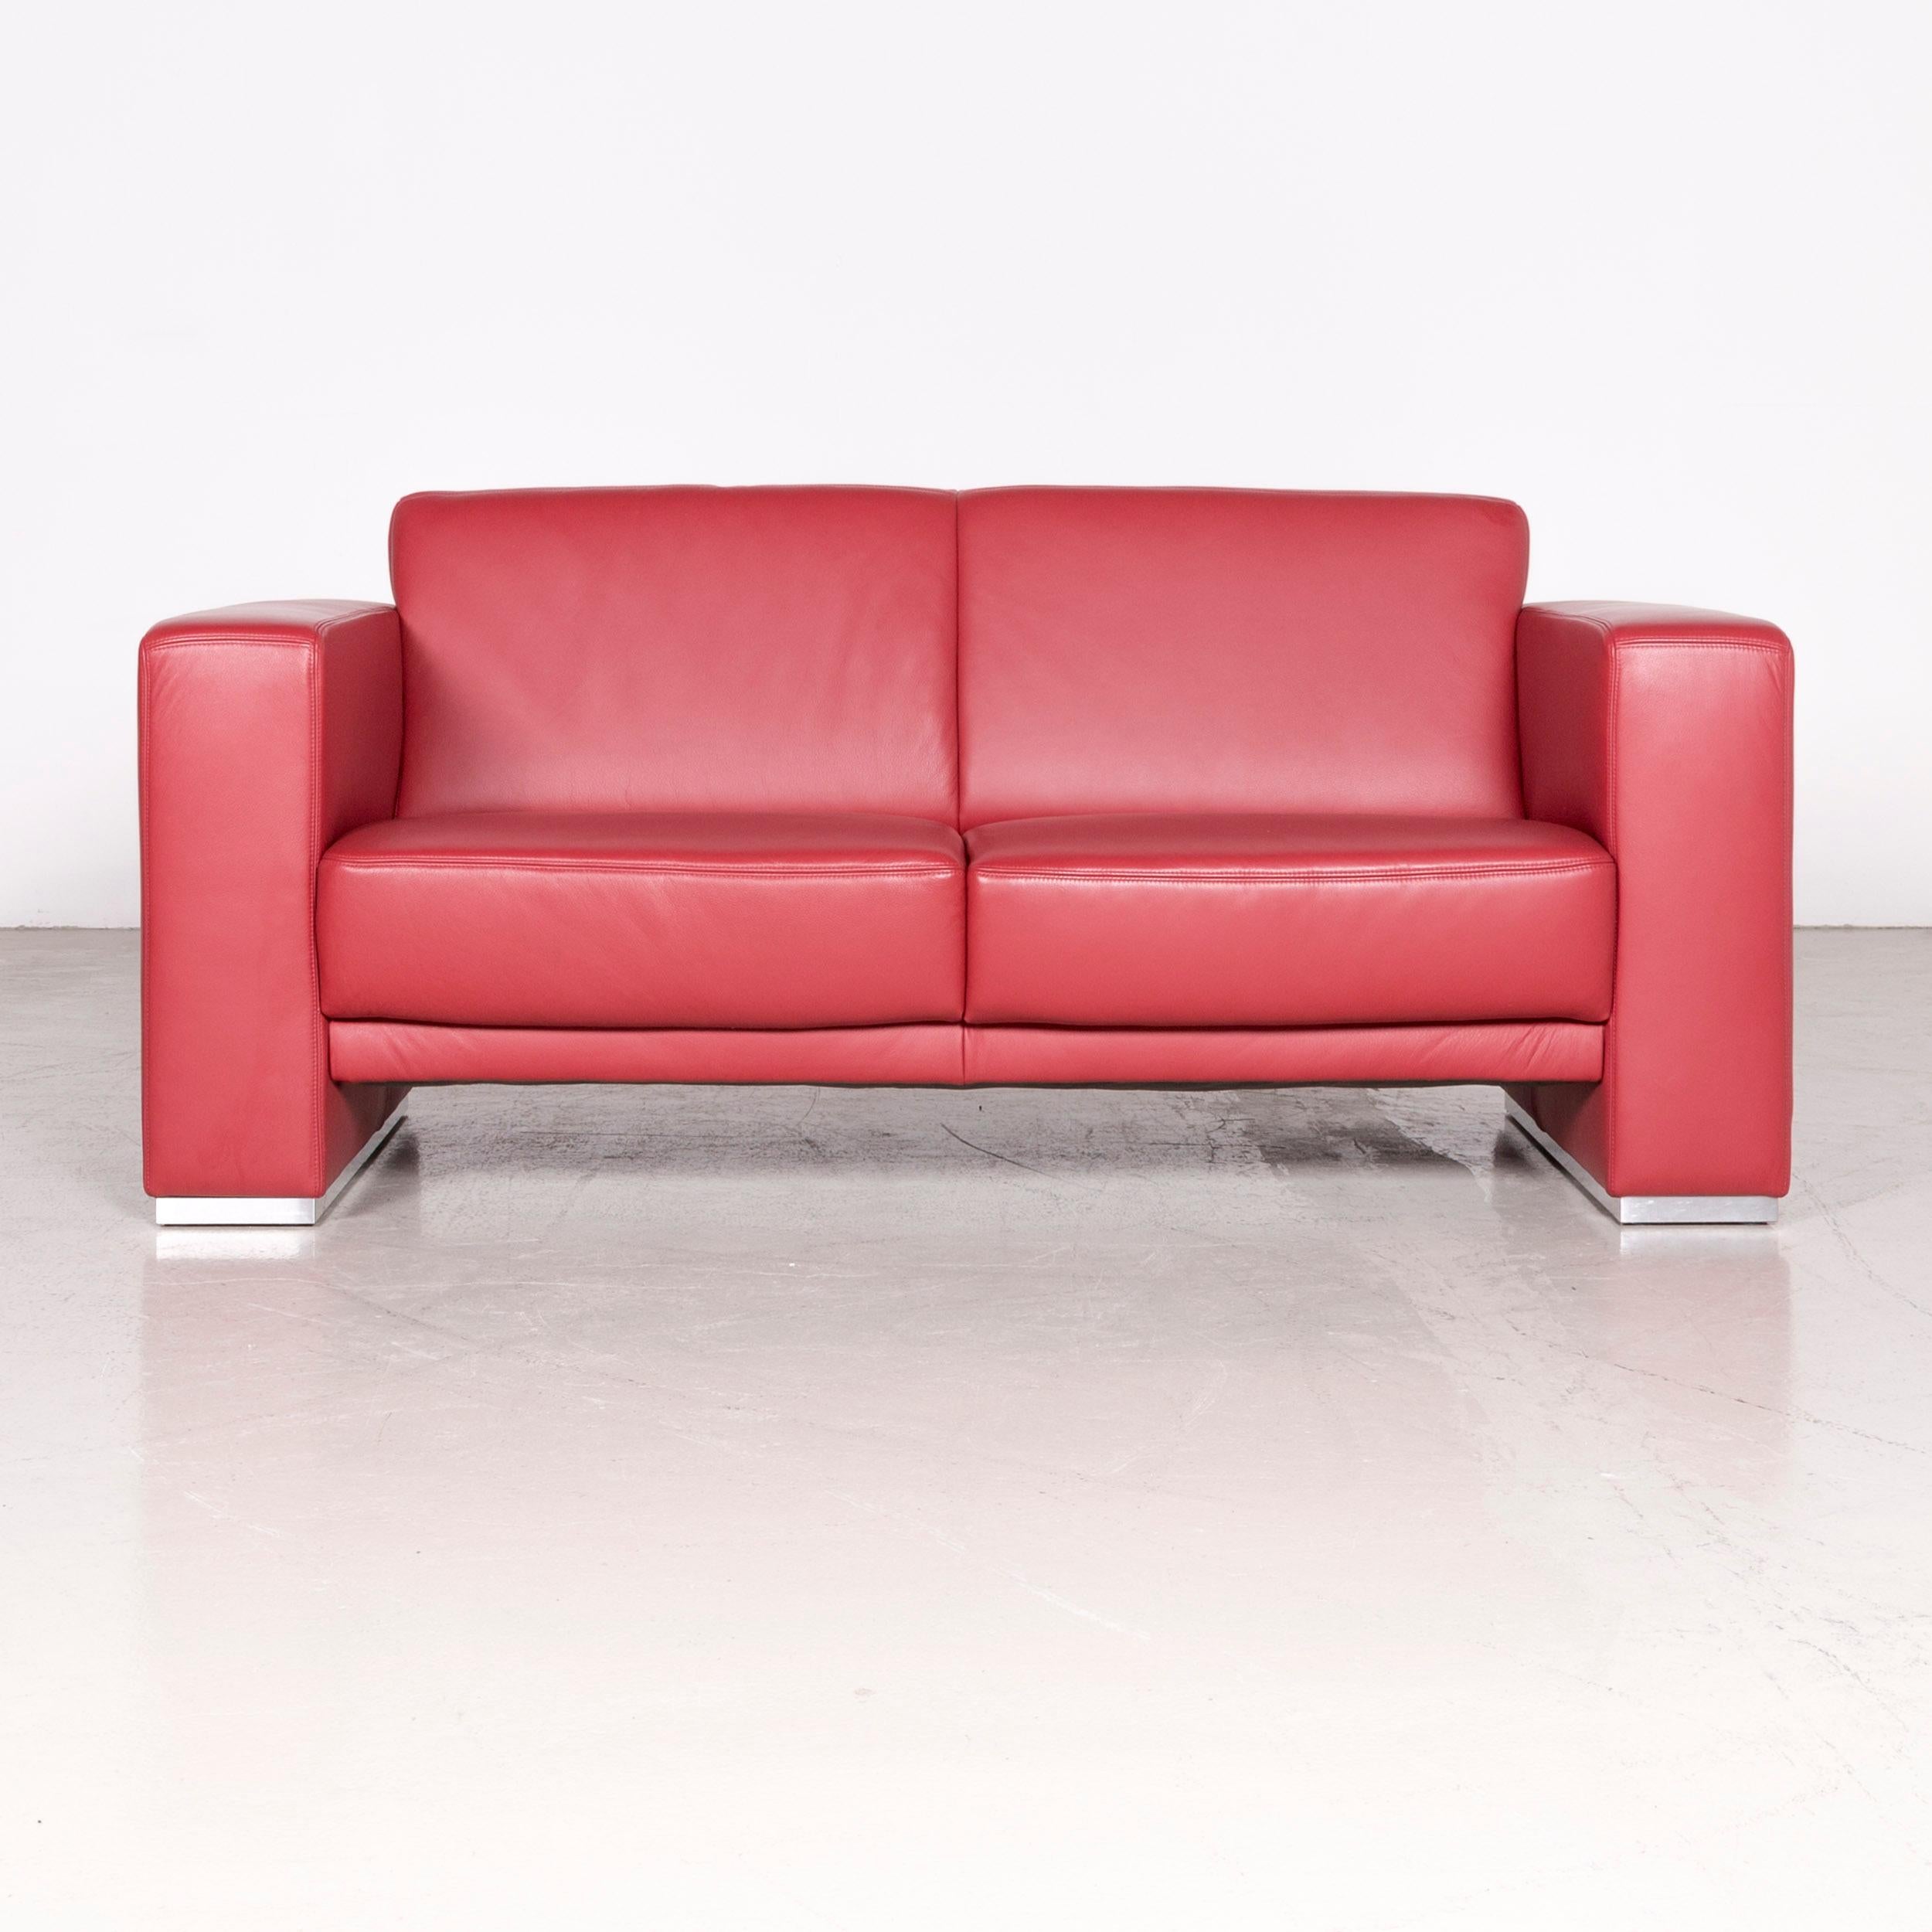 Koinor Nove Designer Leather Sofa Red Two-Seat Couch 6